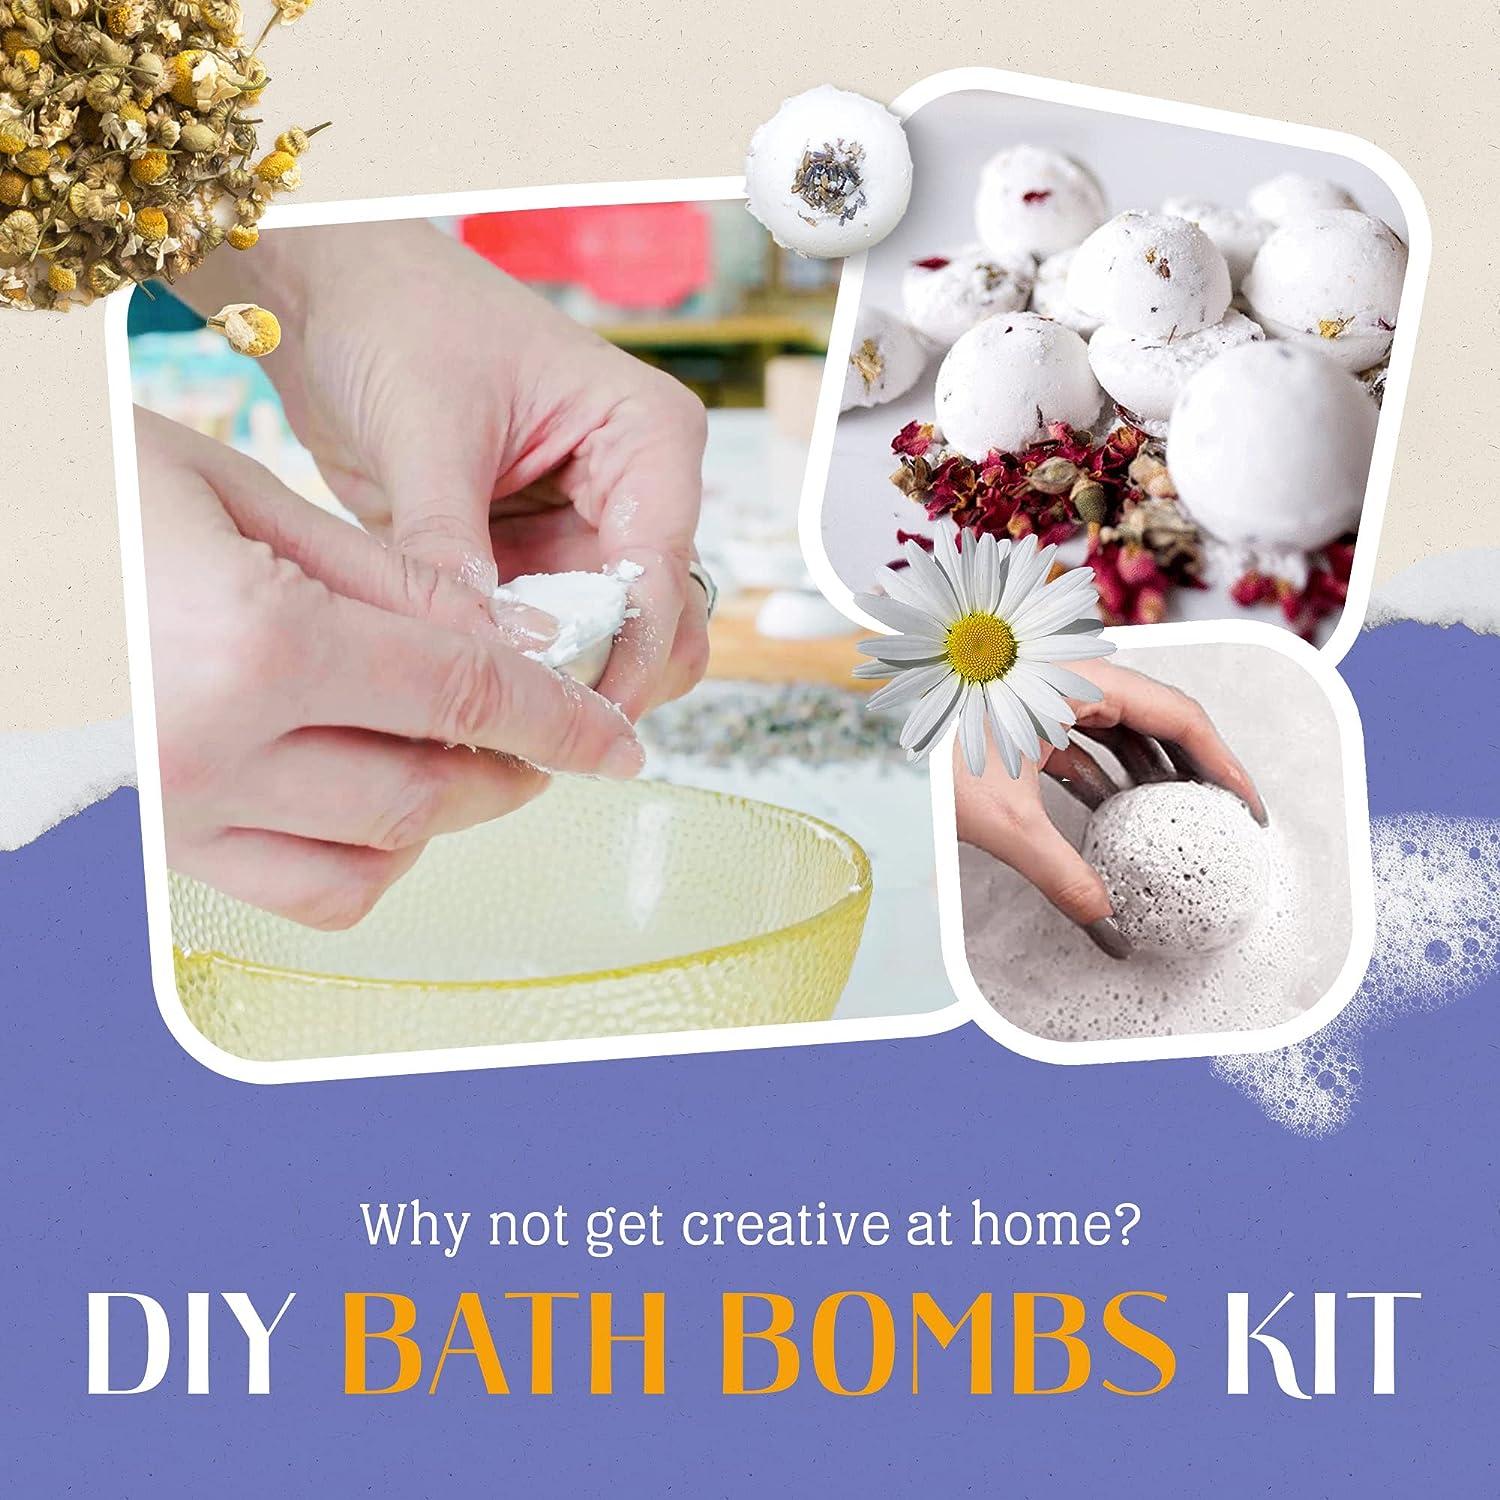 Earthy Good DIY Bath Bomb Kit With Organic Ingredients 100% Natural  Includes: Essential Oils Dried Rose Chamomile & Lavender Molds Guide &  More- Includes Furoshiki Cloth- Makes 10 Mini Bath Bombs